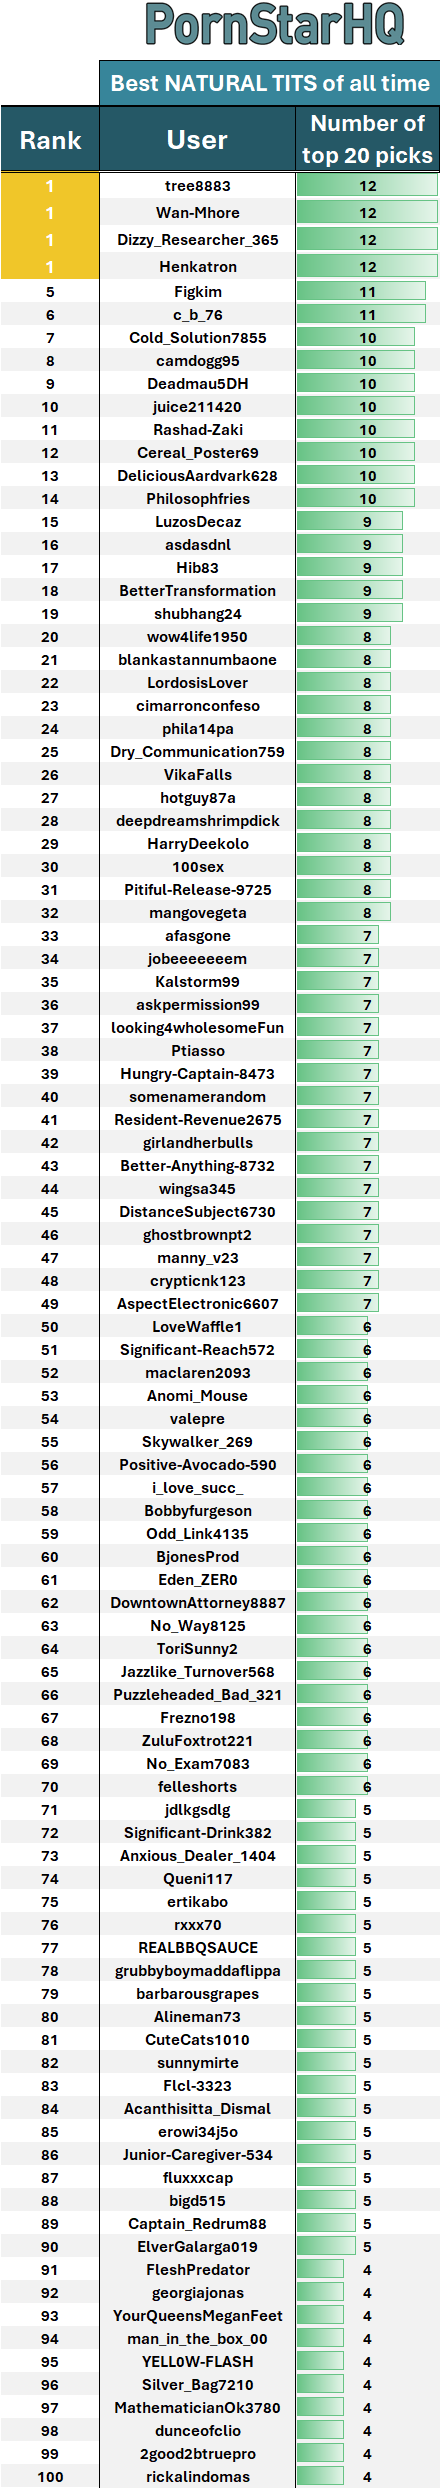 Picture by the_felle showing 'Best User Lists For The Natural Tits Ranking! number Of Pornstars That You Shared With The Community Top 20. How Well Did You Do?' number 1